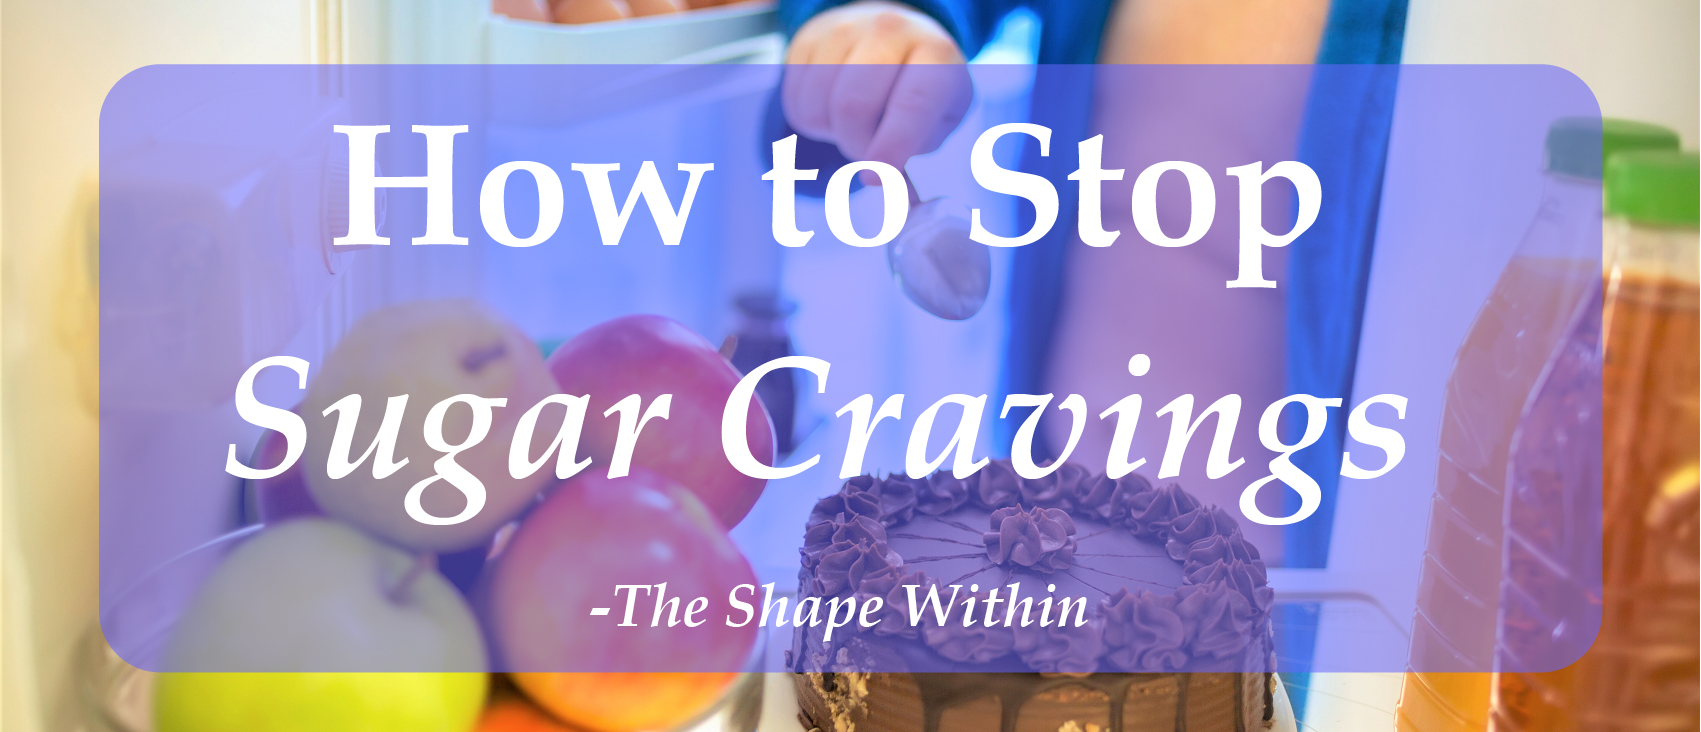 Learn how to stop eating sugar by filling your diet with whole, nutritious, healthy foods